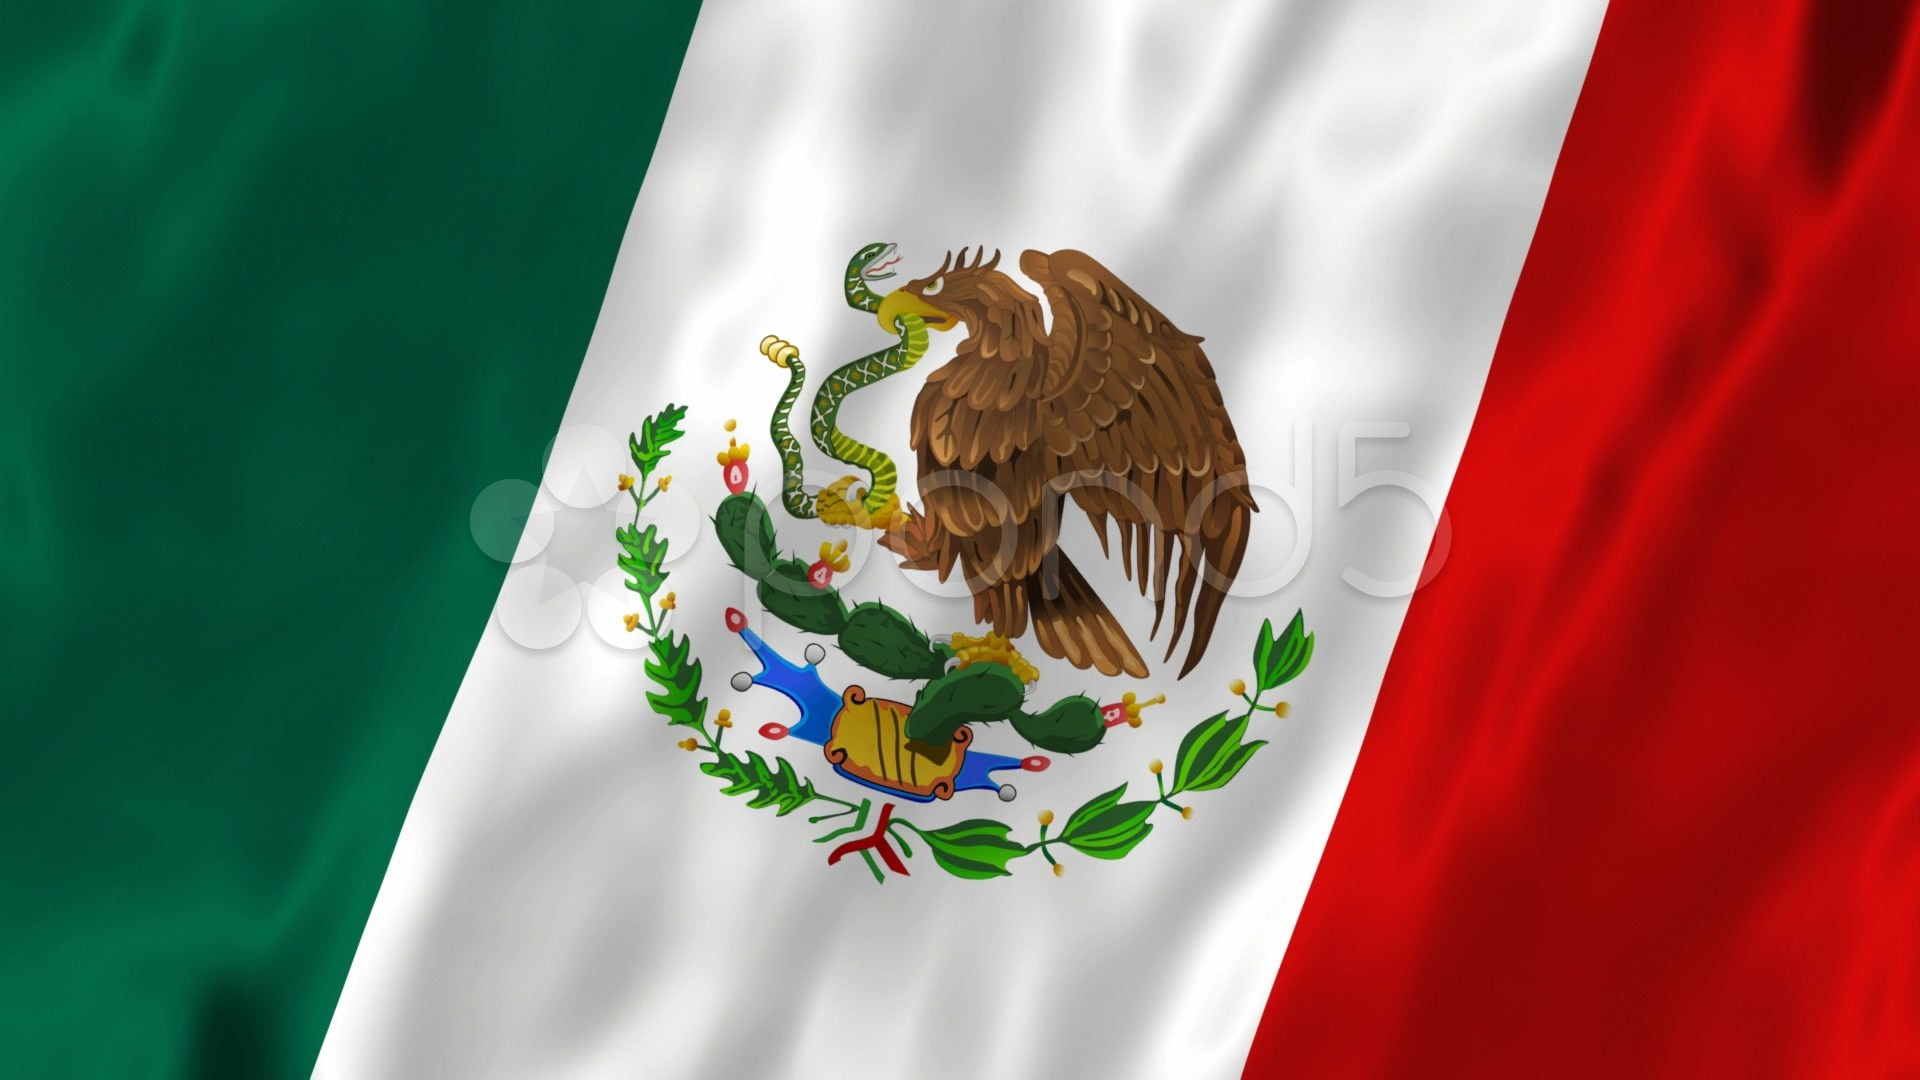 1920x1080 ... Great Mexican Flag Wallpaper Free Wallpaper For Desktop and Mobile in  All Resolutions Free Download wallpaper